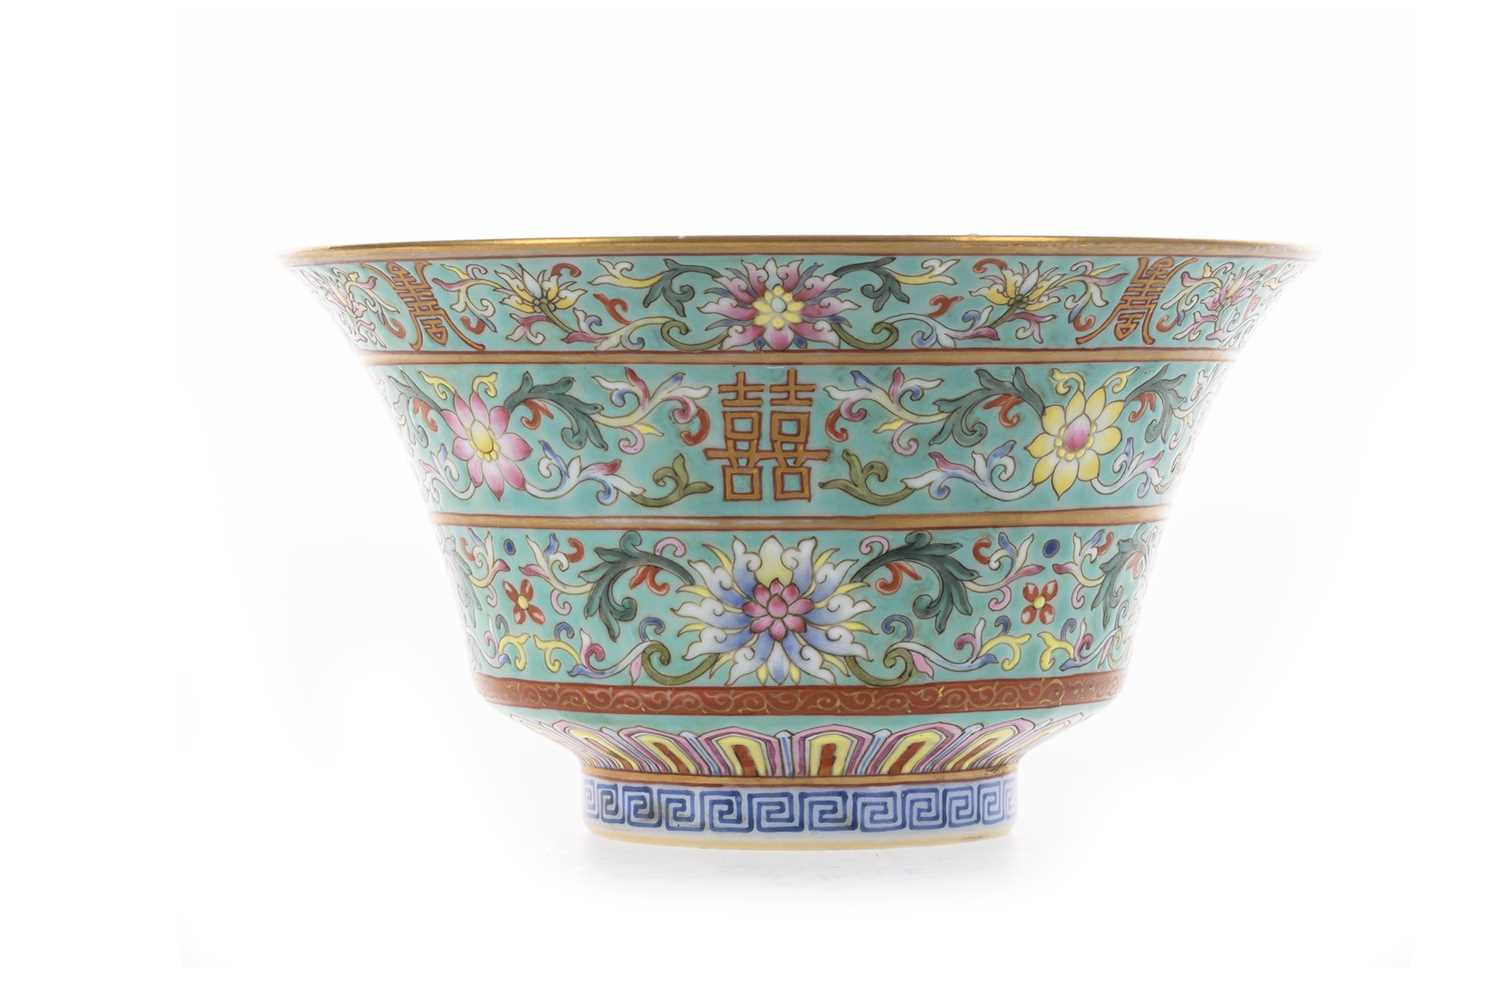 CHINESE FAMILLE ROSE 'FLOWER' BOWL, LATE 19TH/EARLY 20TH CENTURY